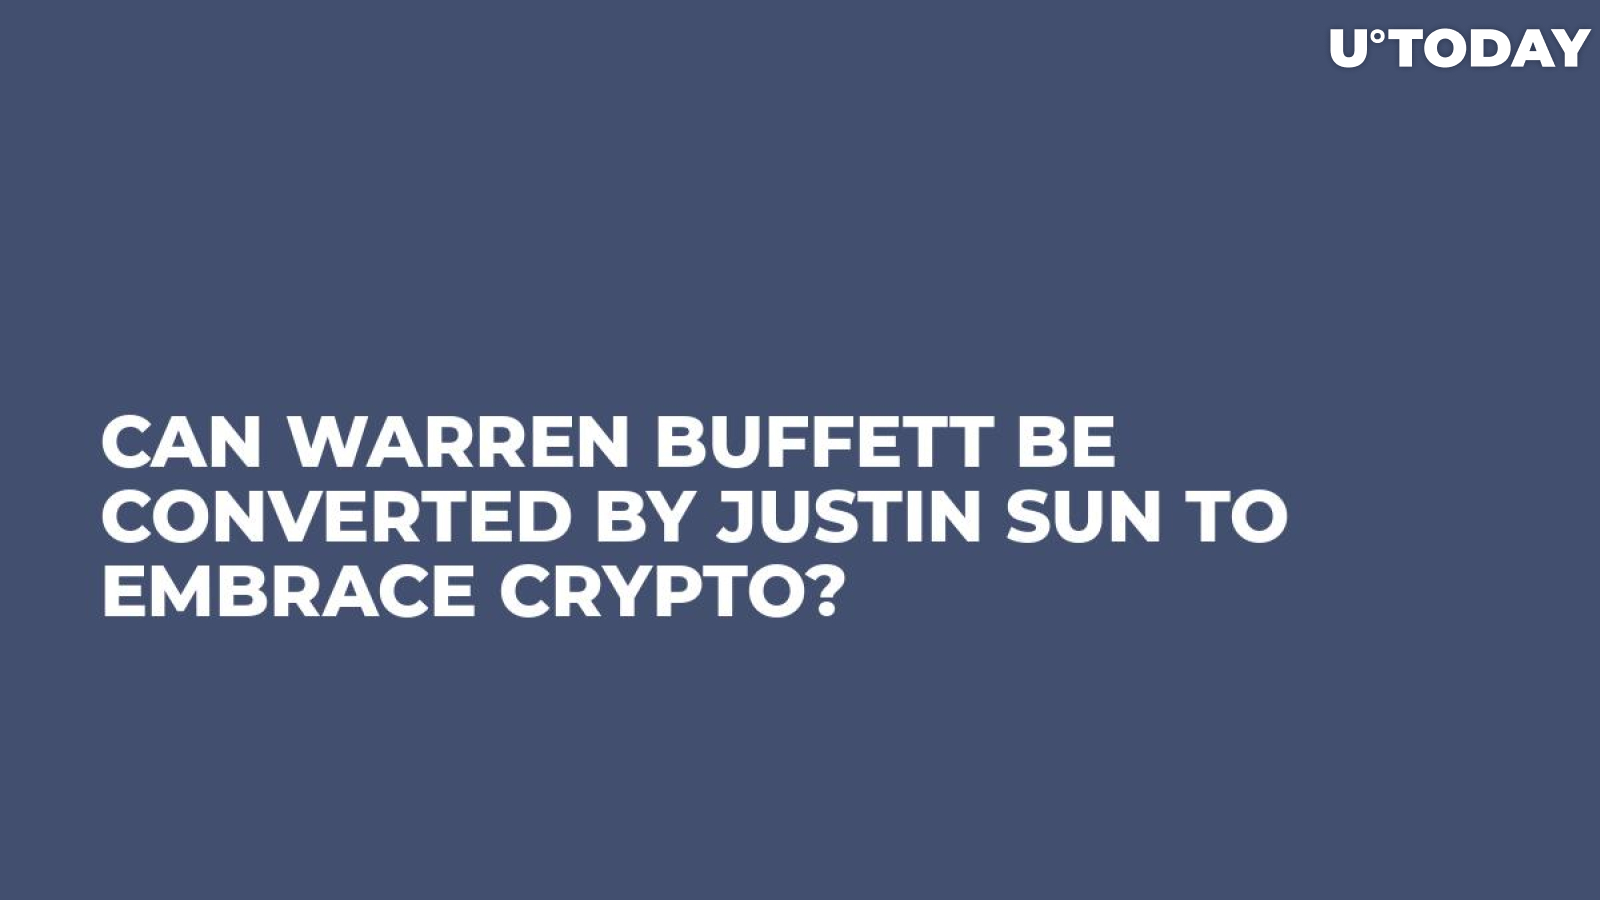 Can Warren Buffett Be Converted by Justin Sun to Embrace Crypto?